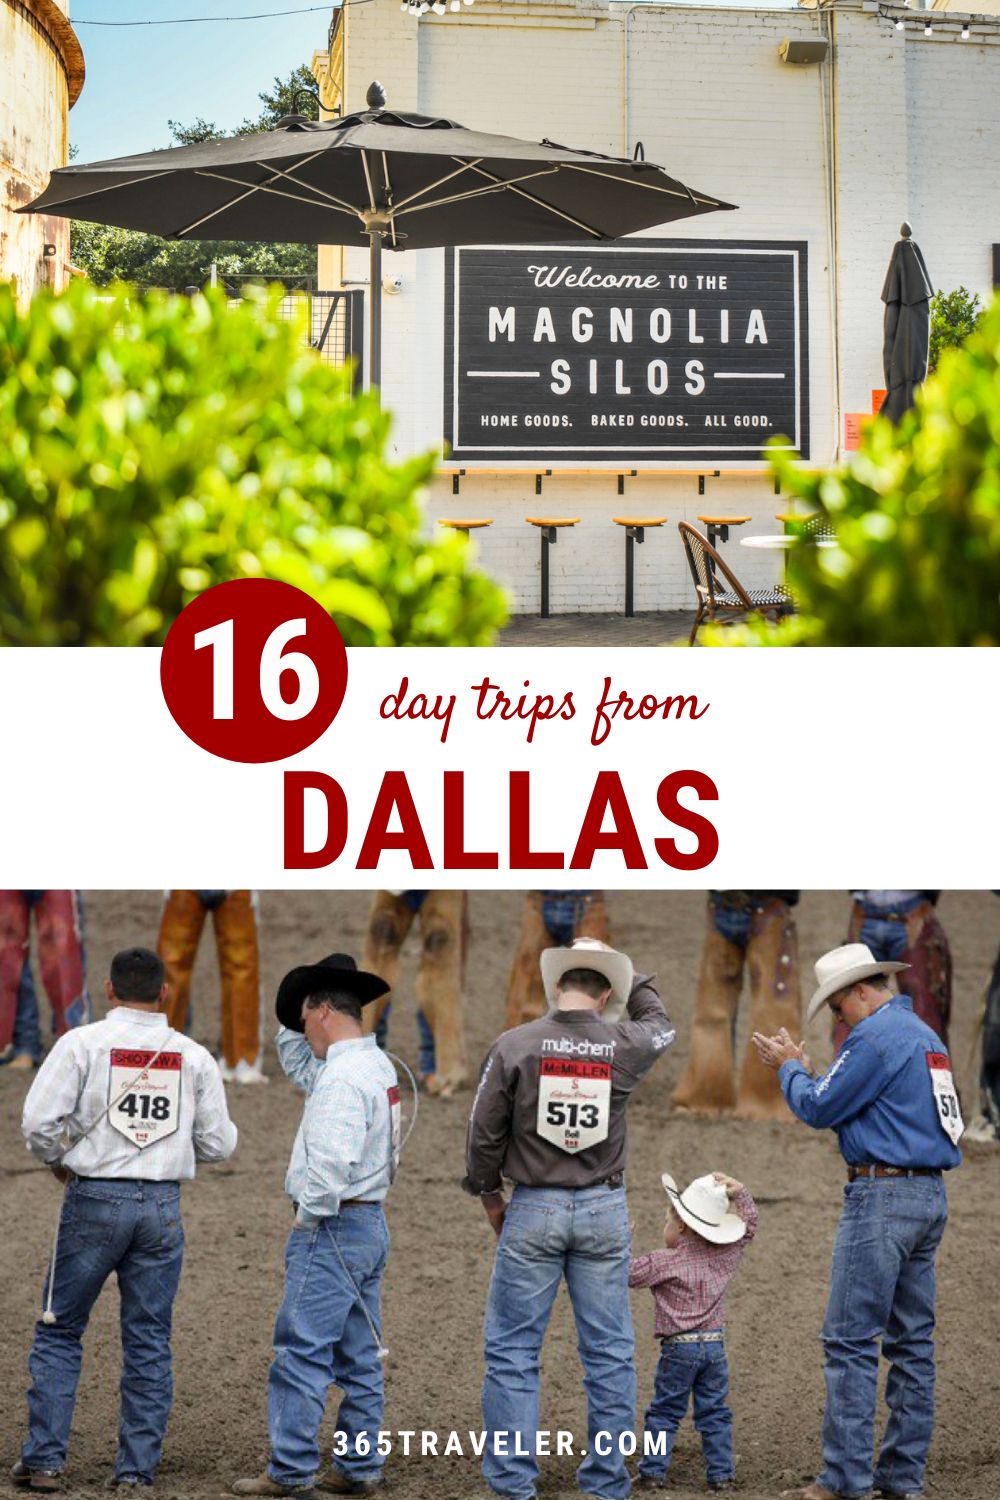 16 FUN DAY TRIPS FROM DALLAS YOU'RE GONNA LOVE